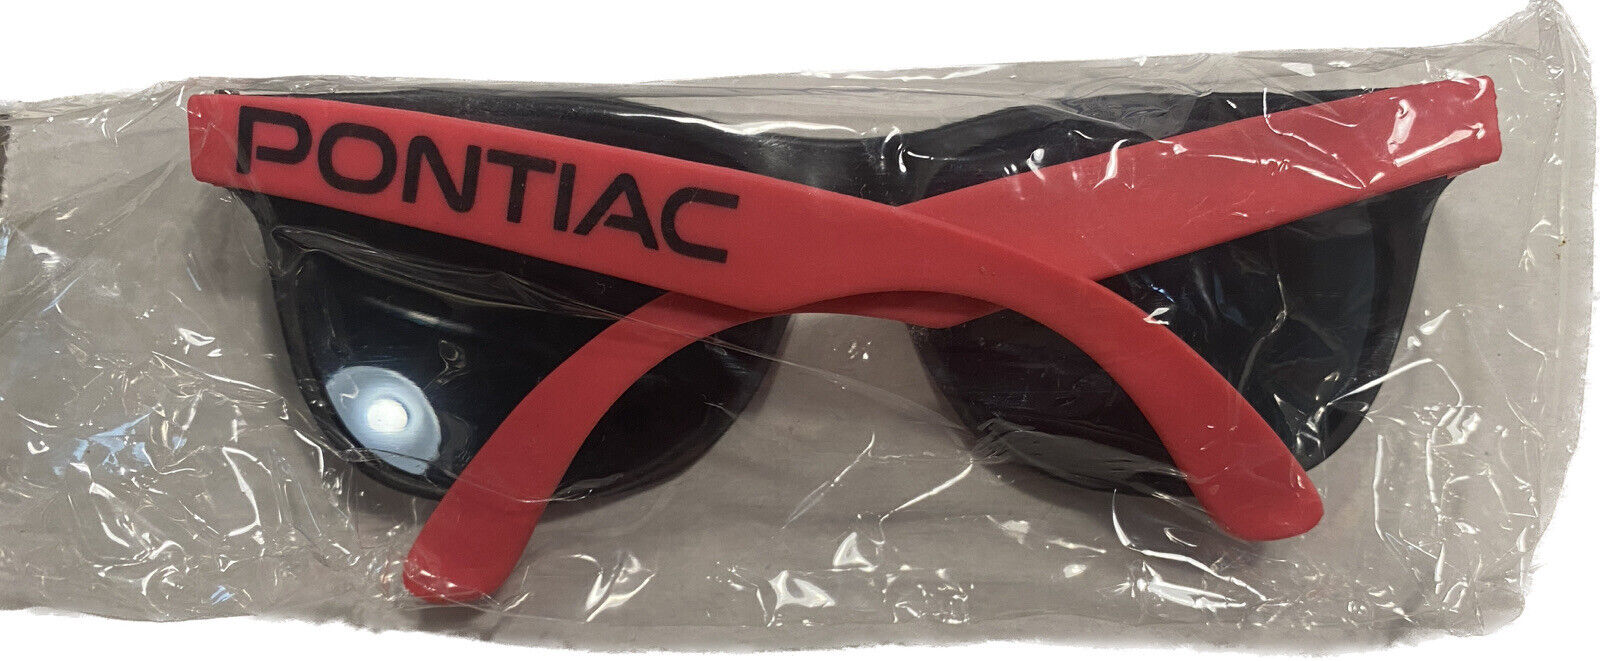 VTG Pontiac Promotional Sunglasses Collectible Neon Pink, New Sealed, 1990’s A